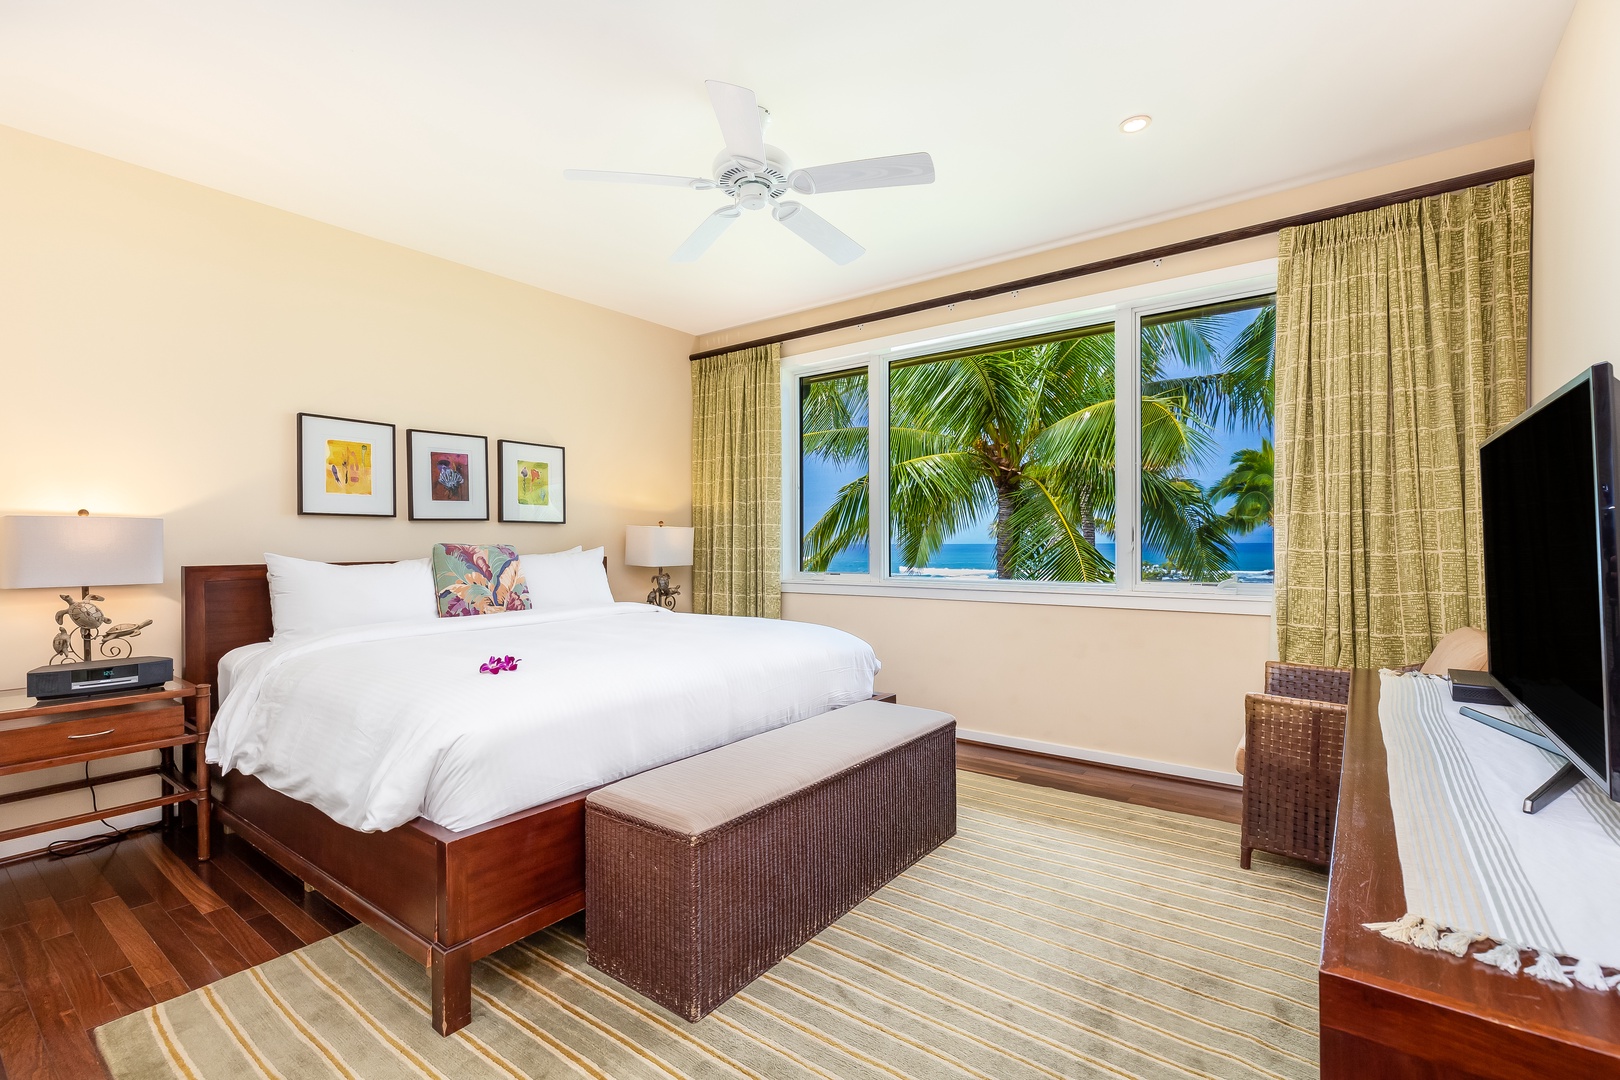 Kahuku Vacation Rentals, Turtle Bay Villas 301 - primary suite, which offers a King-size bed, walk-in closet, and spa-like bathroom